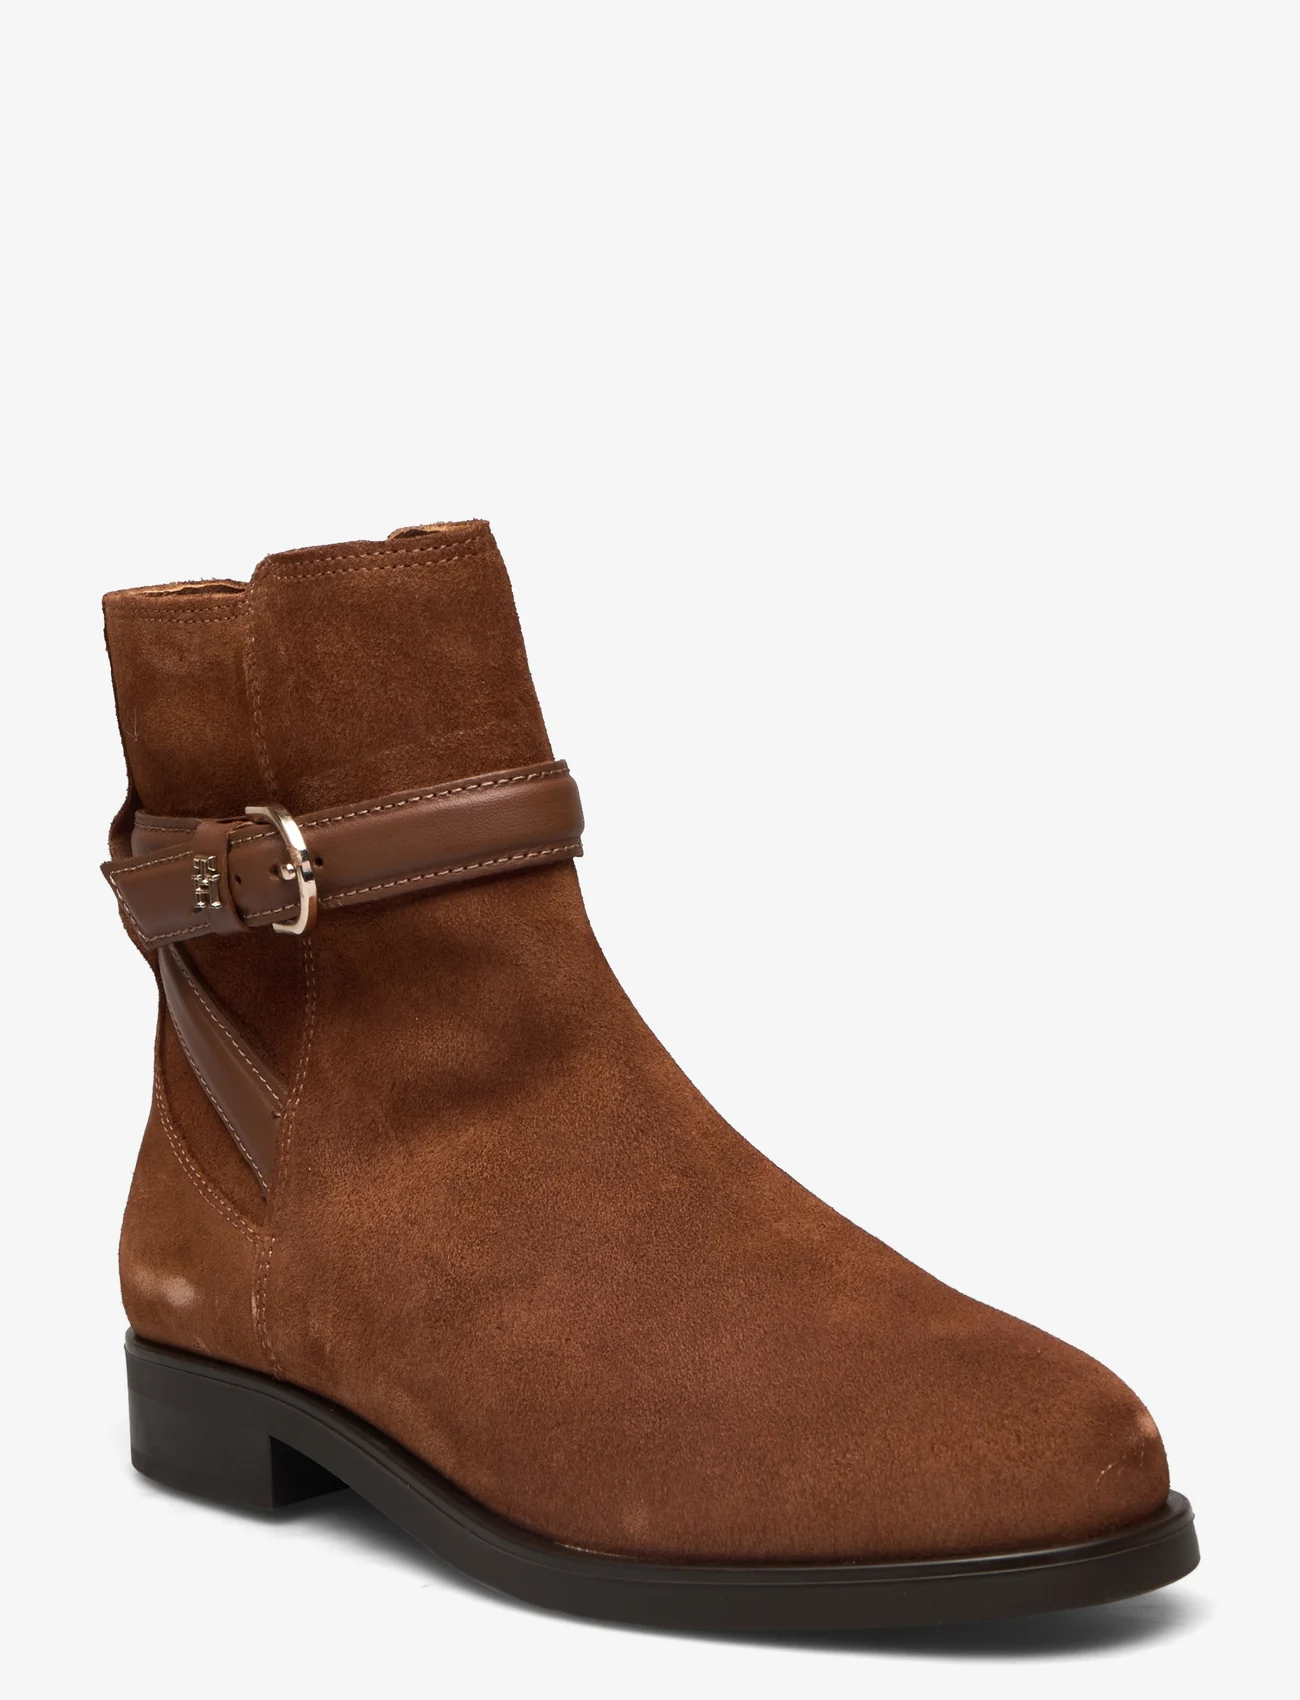 Tommy Hilfiger - ELEVATED ESSENT BOOT THERMO SDE - tasapohjaiset nilkkurit - natural cognac - 0